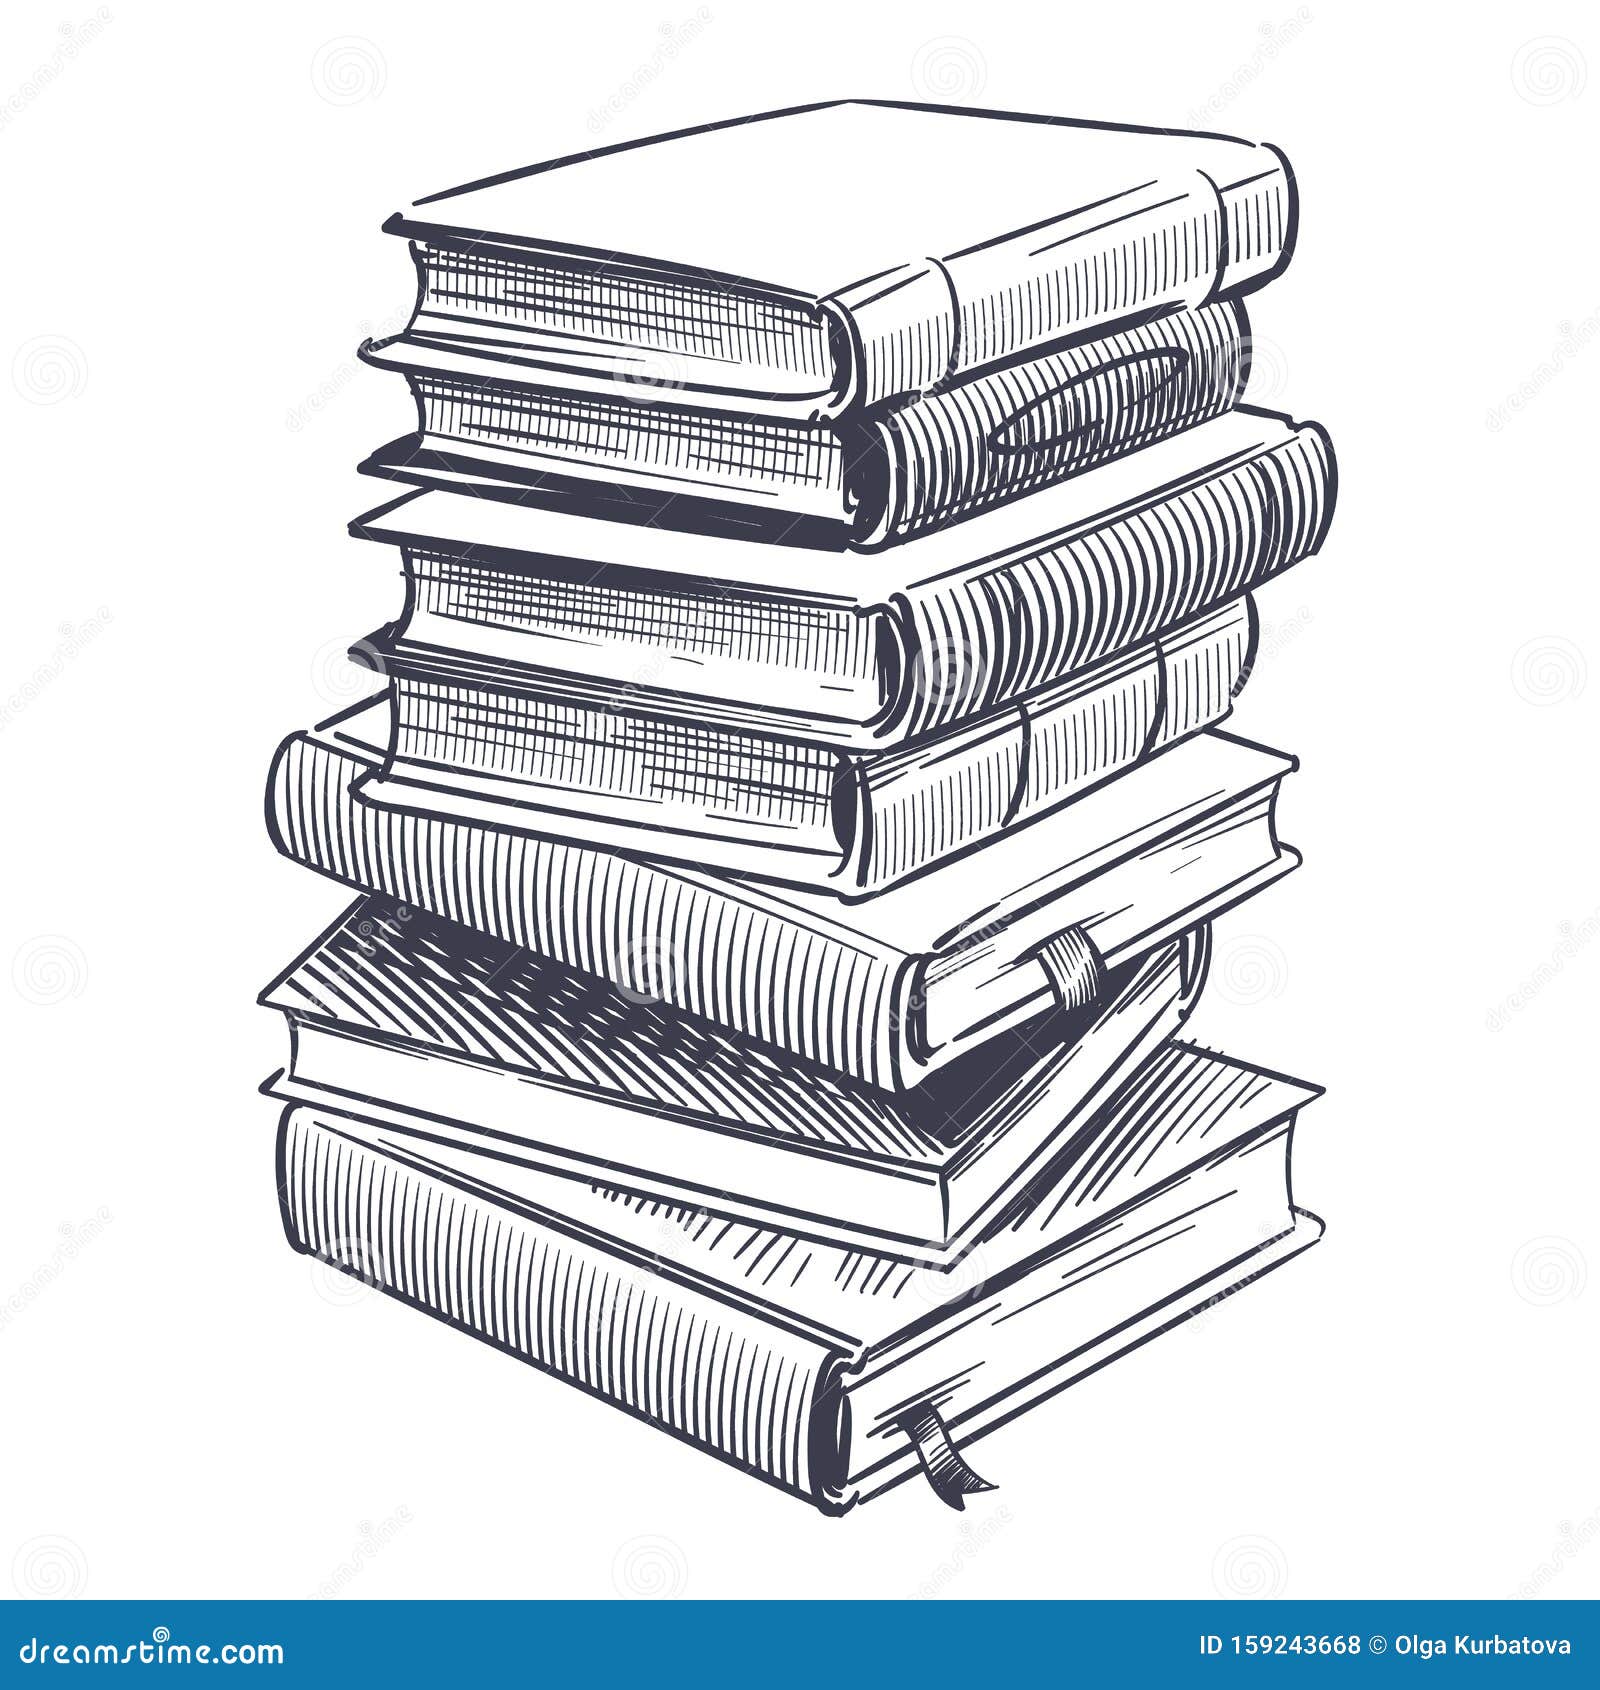 https://thumbs.dreamstime.com/z/stack-books-sketch-drawings-engrave-pile-old-vintage-dictionary-study-research-book-vector-illustration-stack-books-159243668.jpg